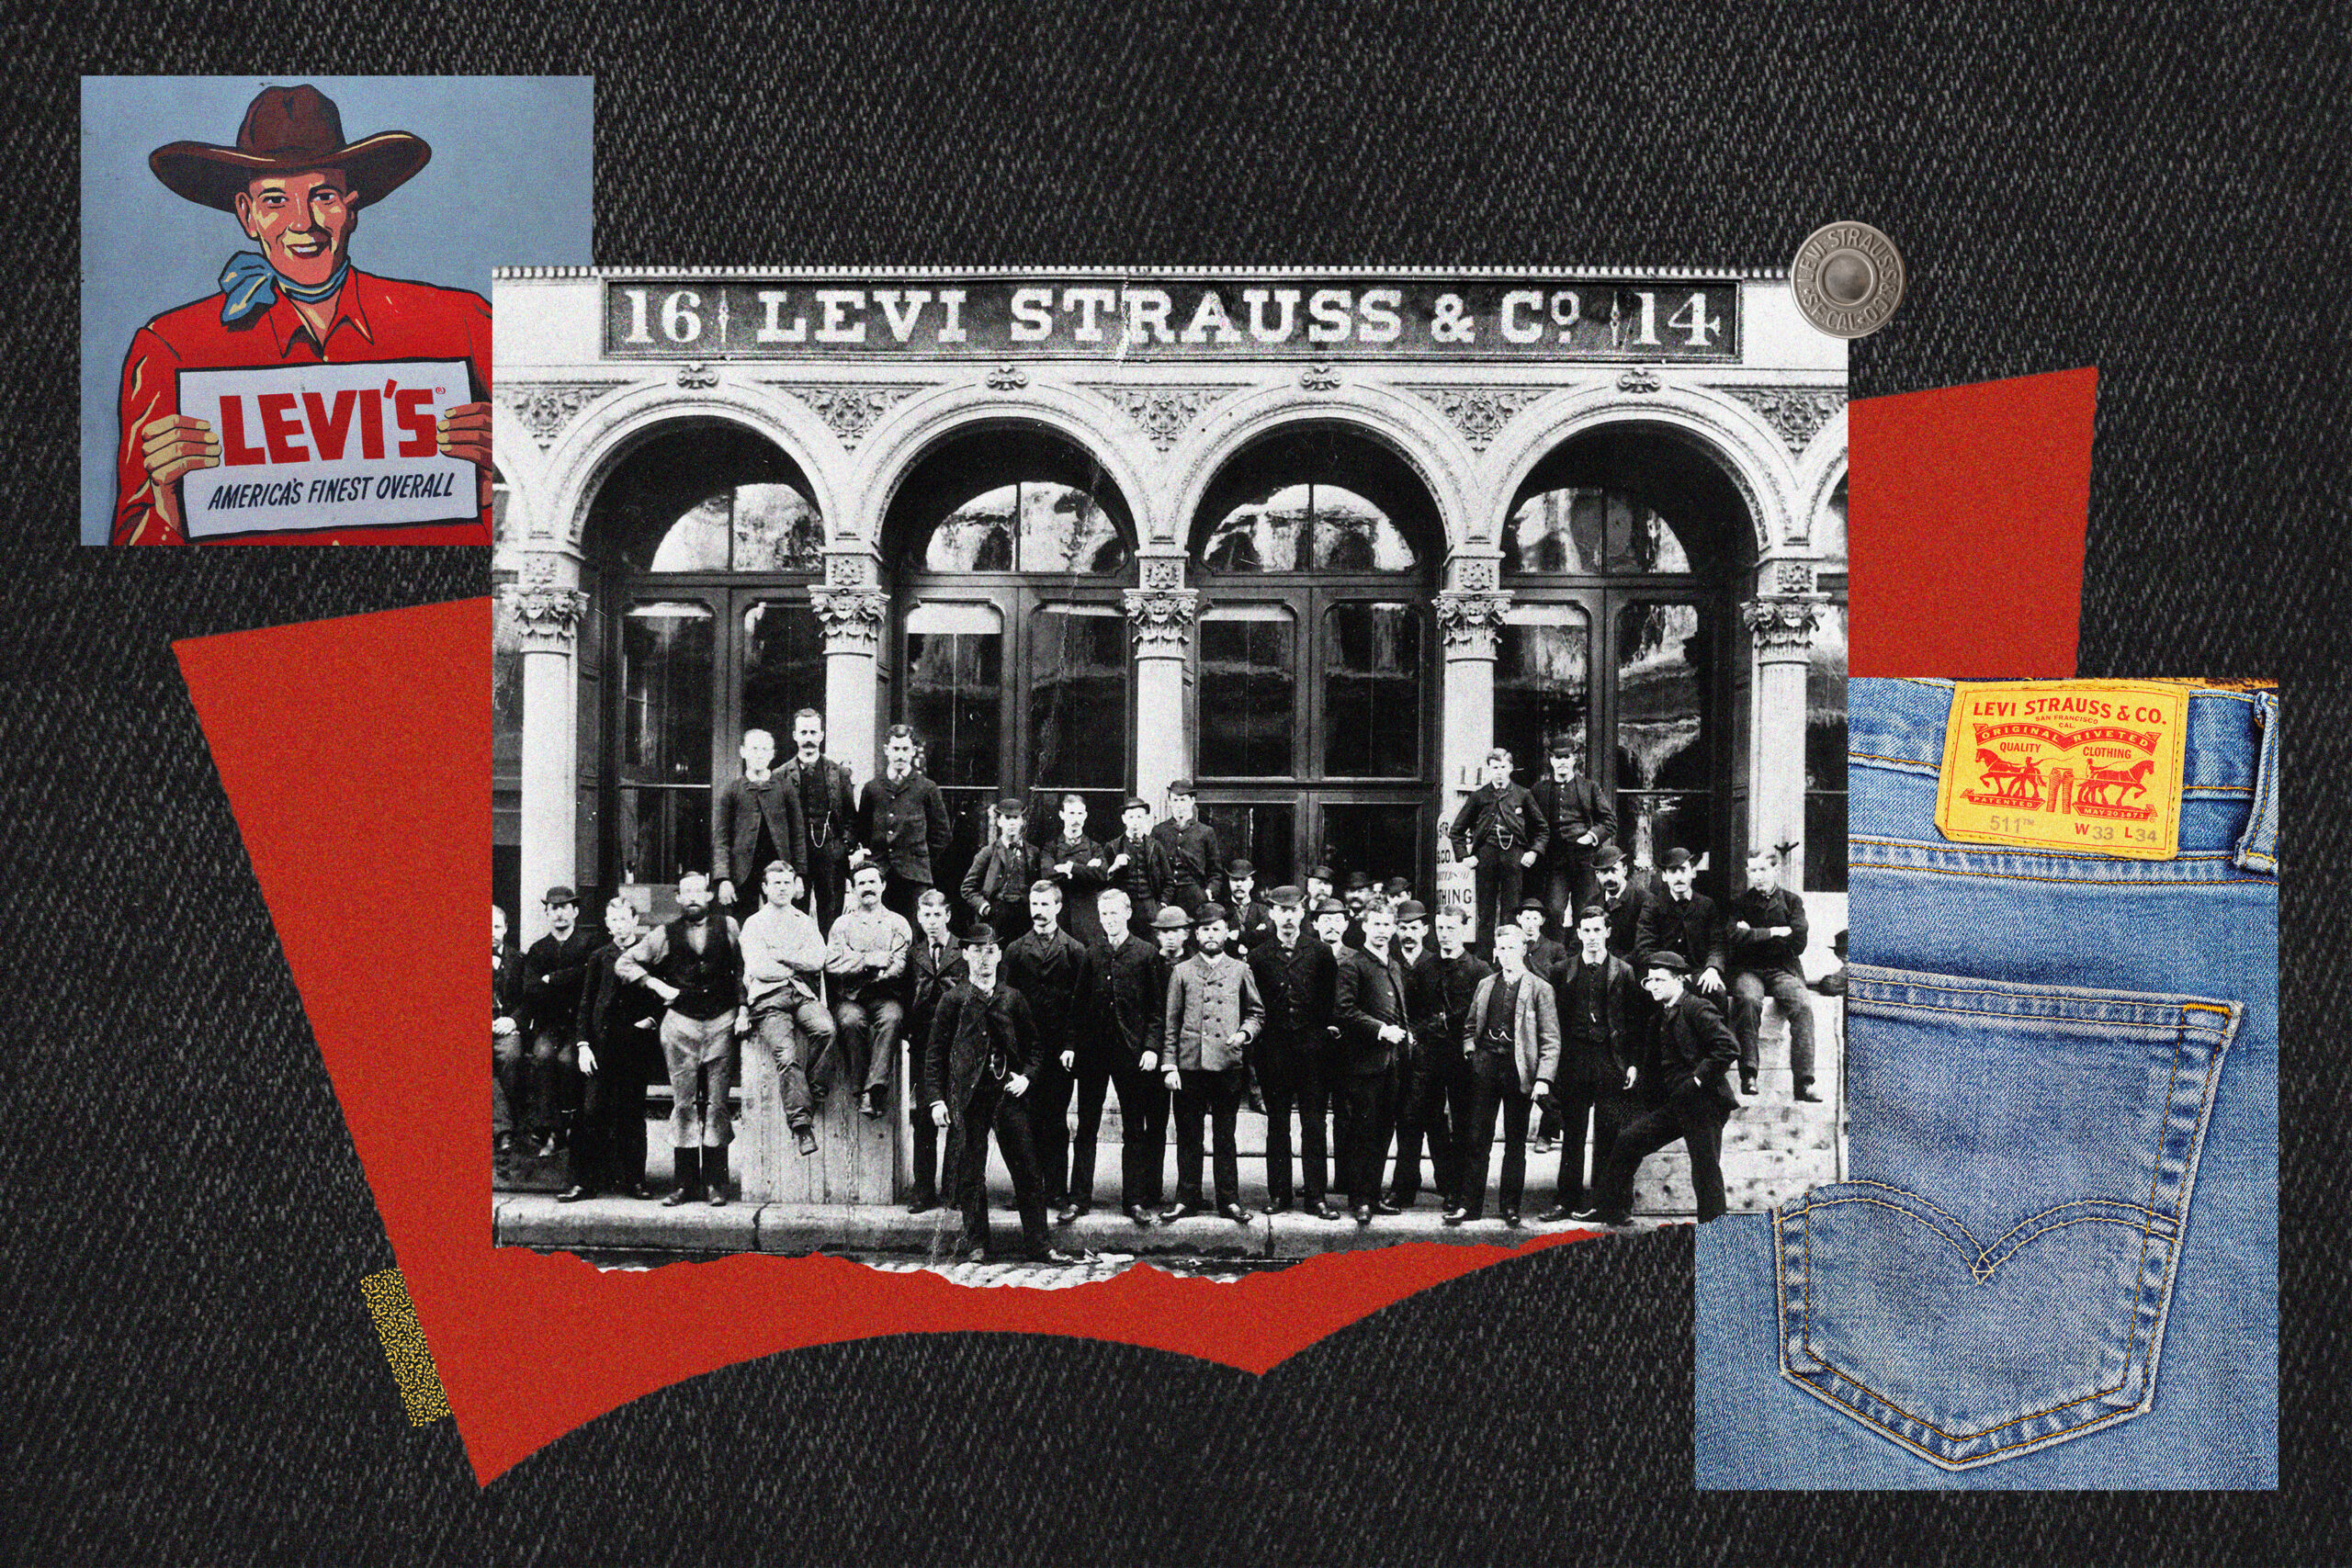 The furious effort behind effortless cool—unraveling the myth of Levi’s